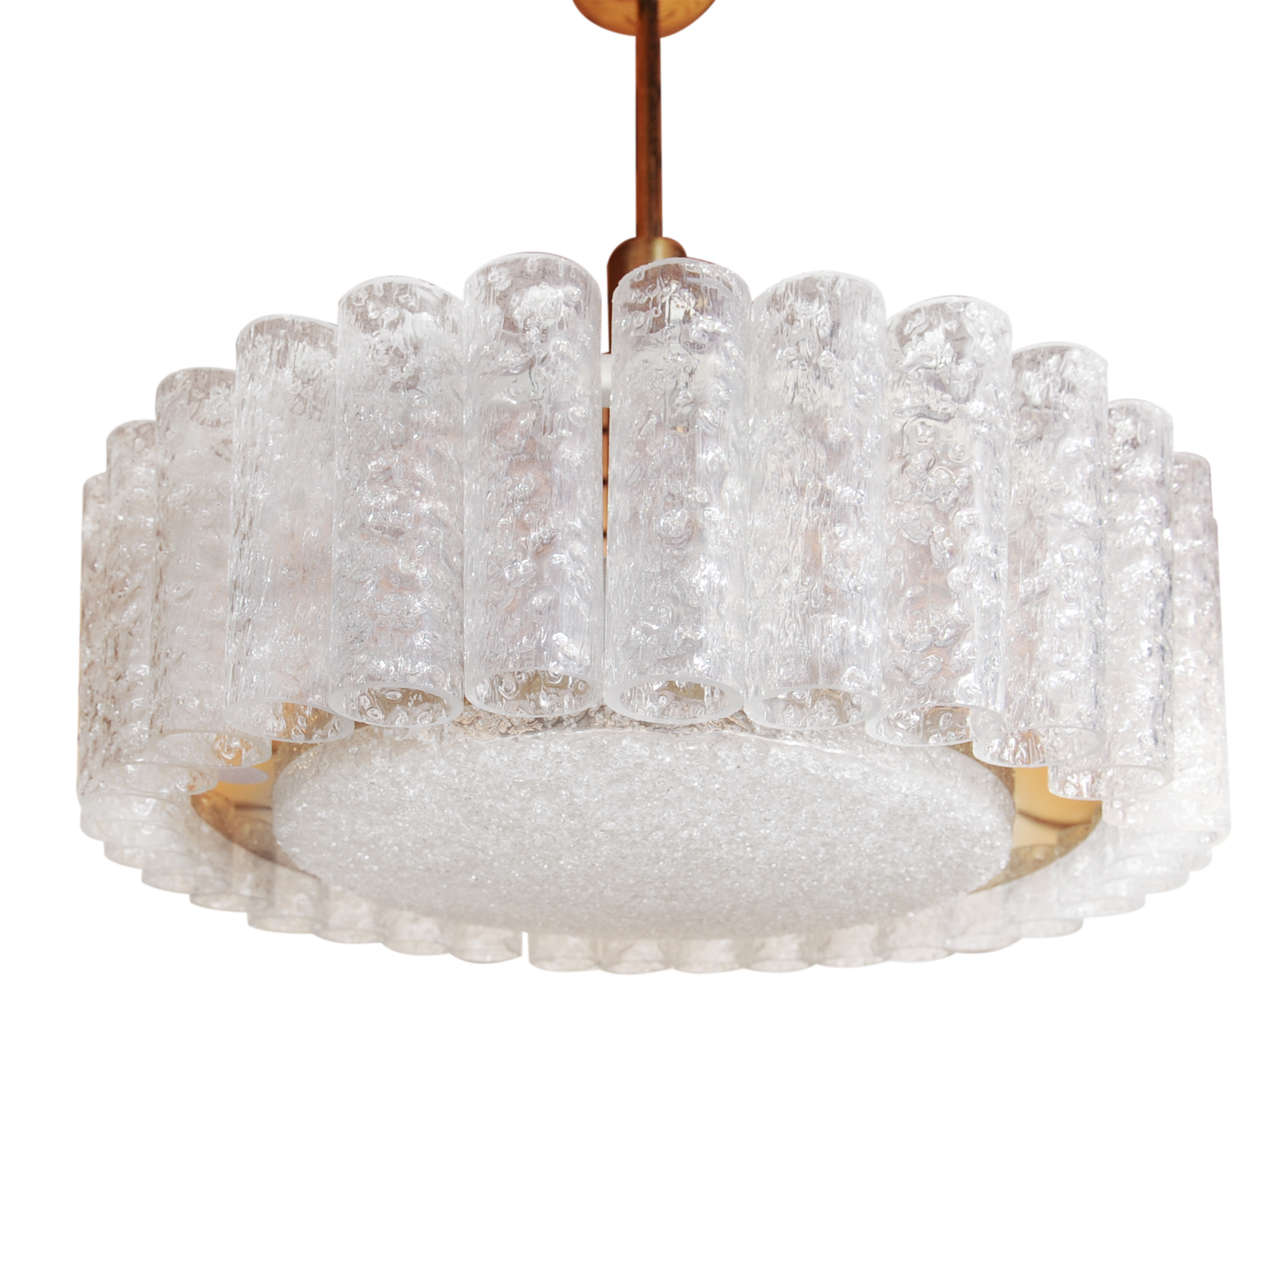 Wonderful Ice Glass Chandelier by Doria, 4 available For Sale